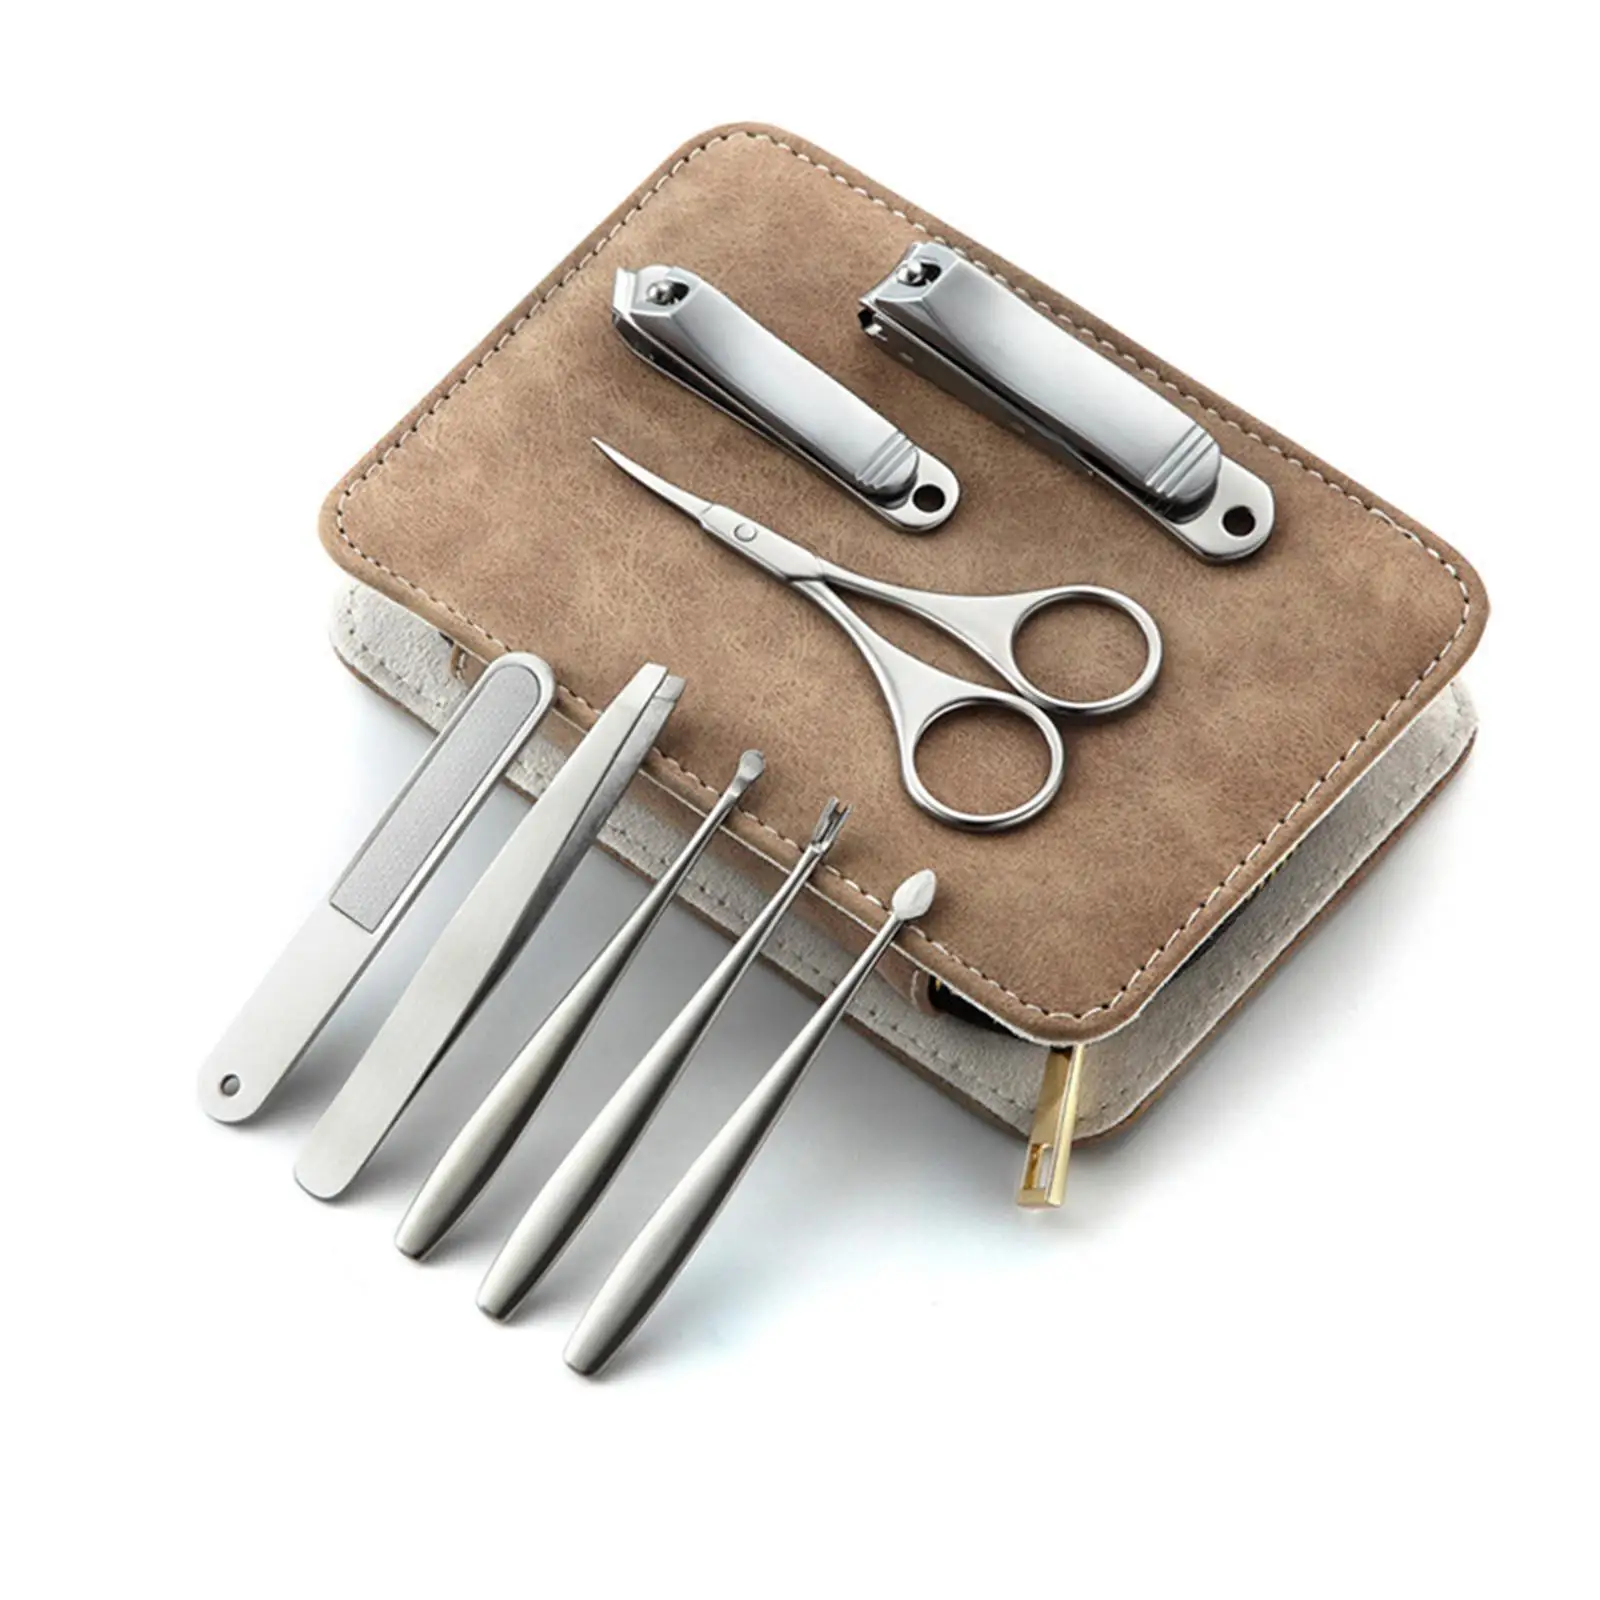 Professional Set of 8 Manicure Set Pedicure Sets  PU Case  Scissors Tools for Nail  Women ,Stainless Steel